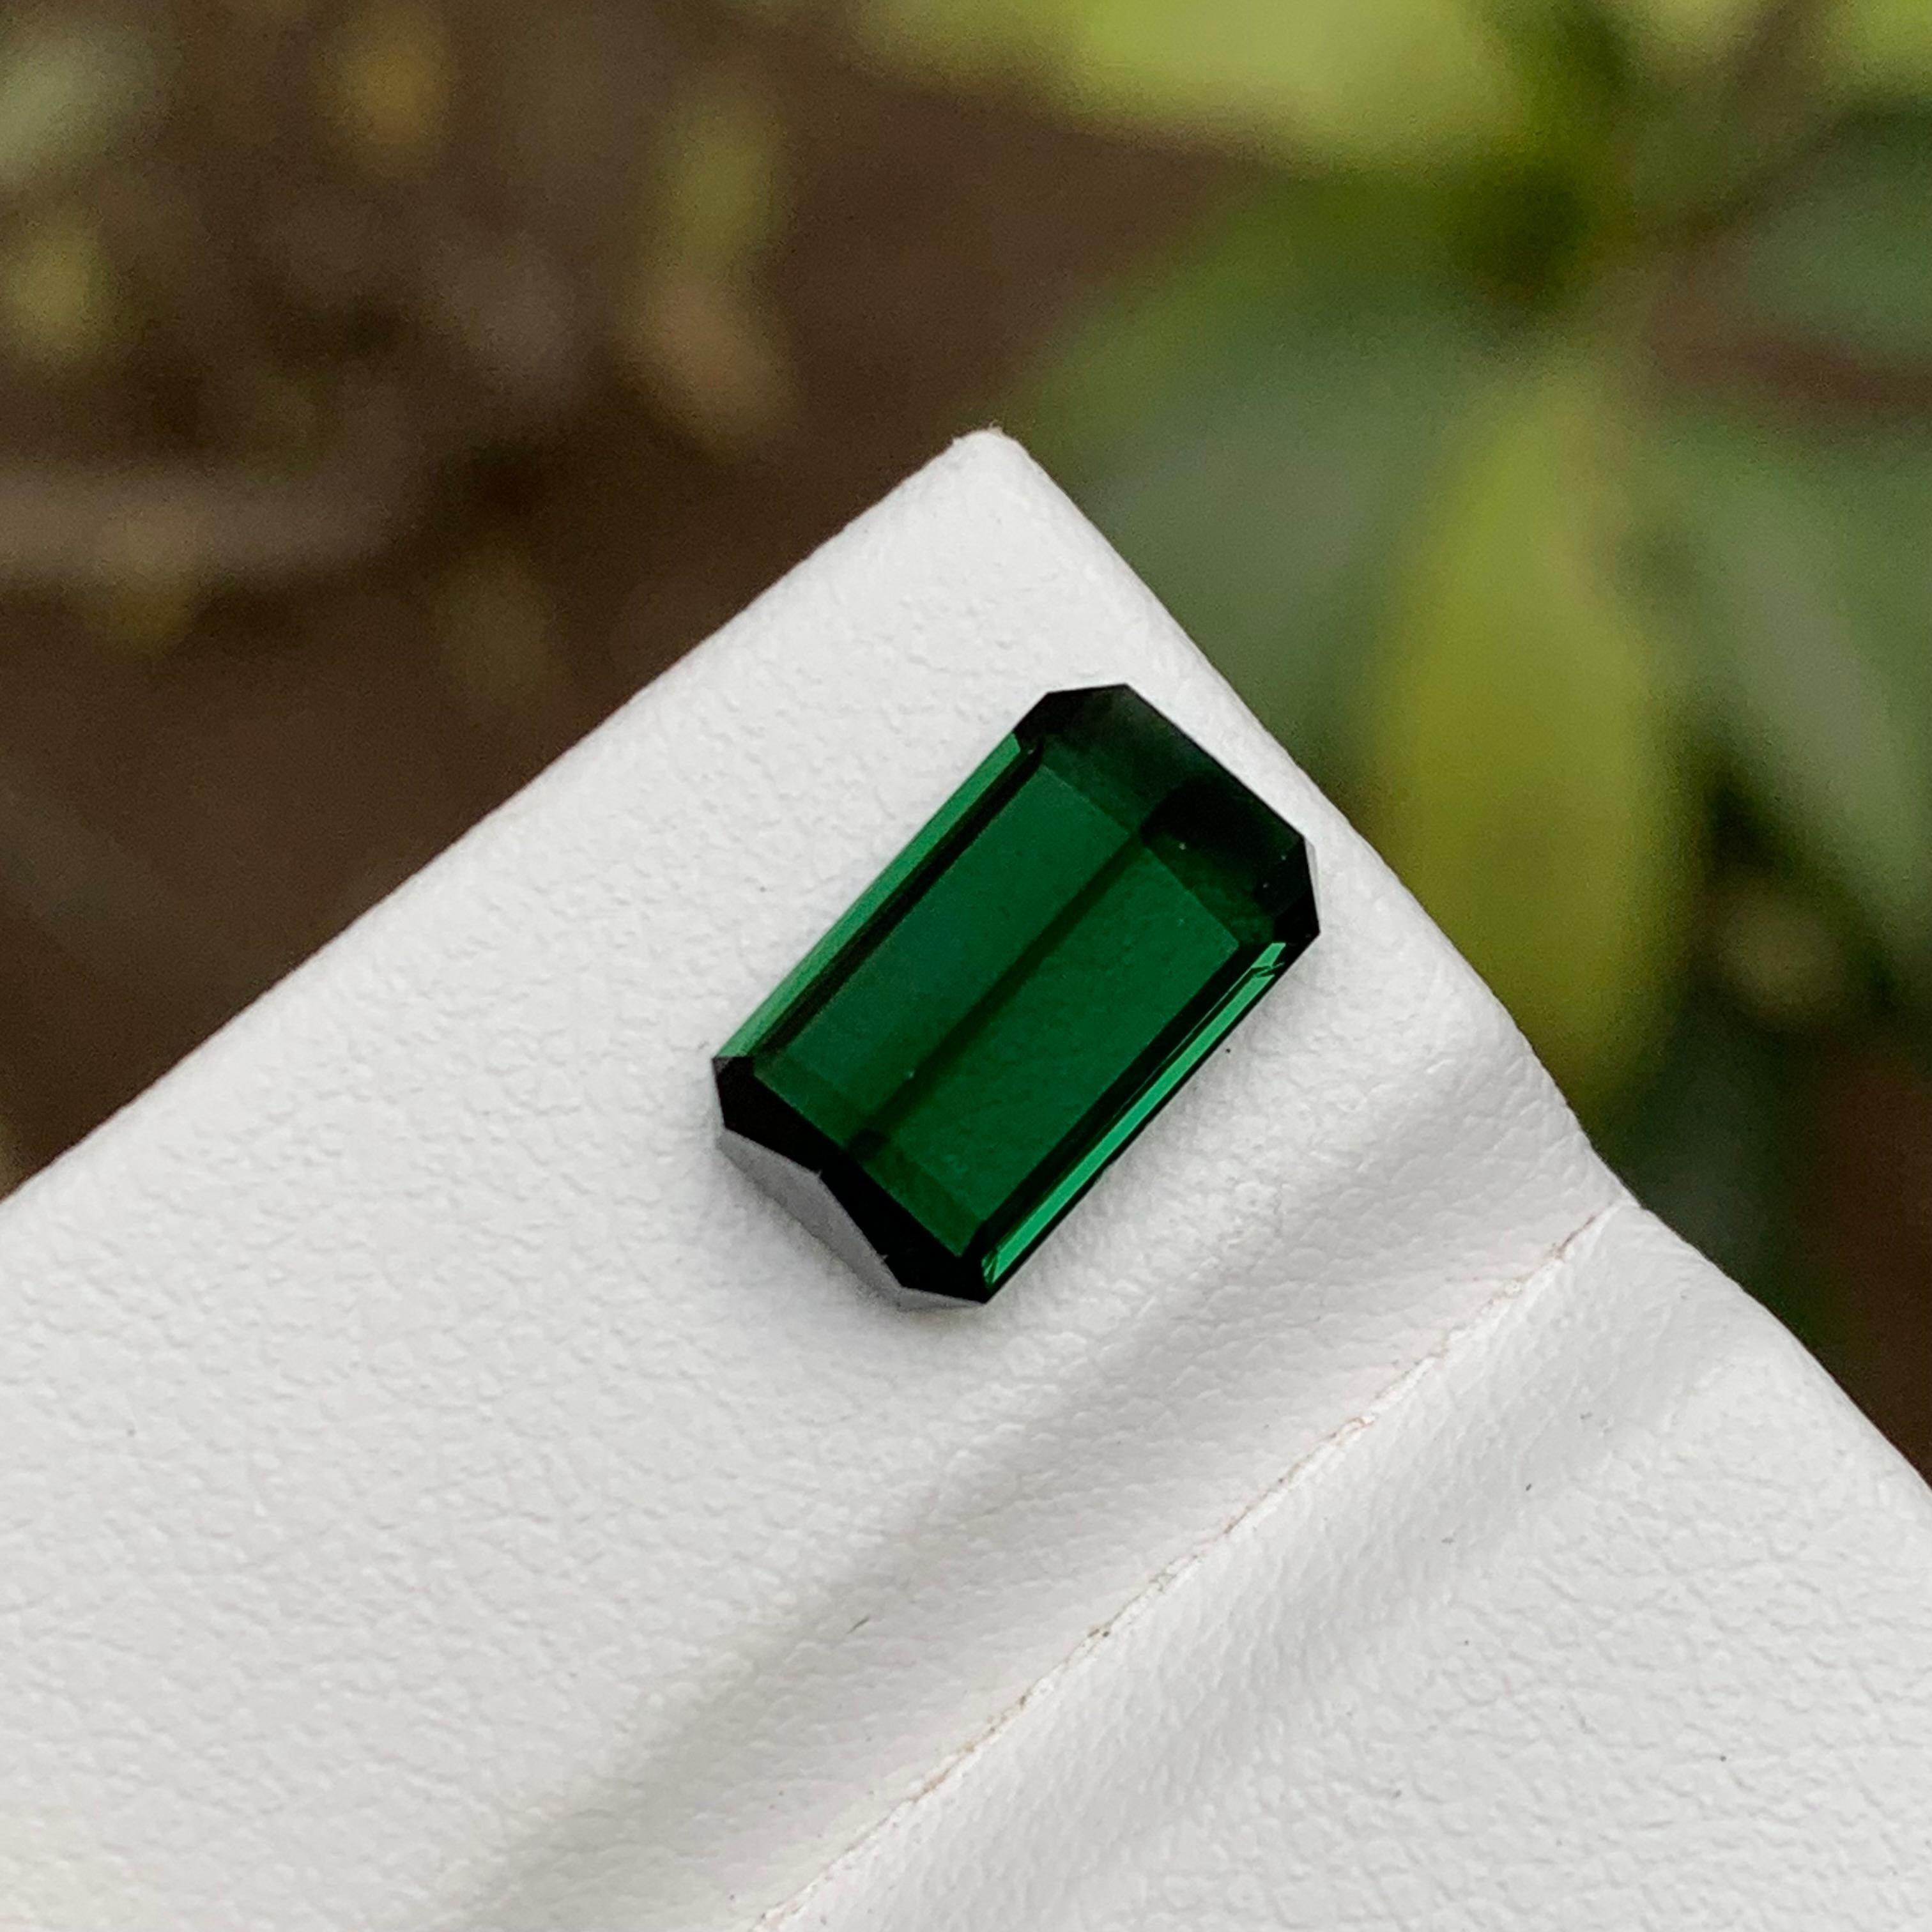 Rare Deep Green Natural Tourmaline Gemstone 2.95 Ct Emerald Cut for Ring/Pendant For Sale 2